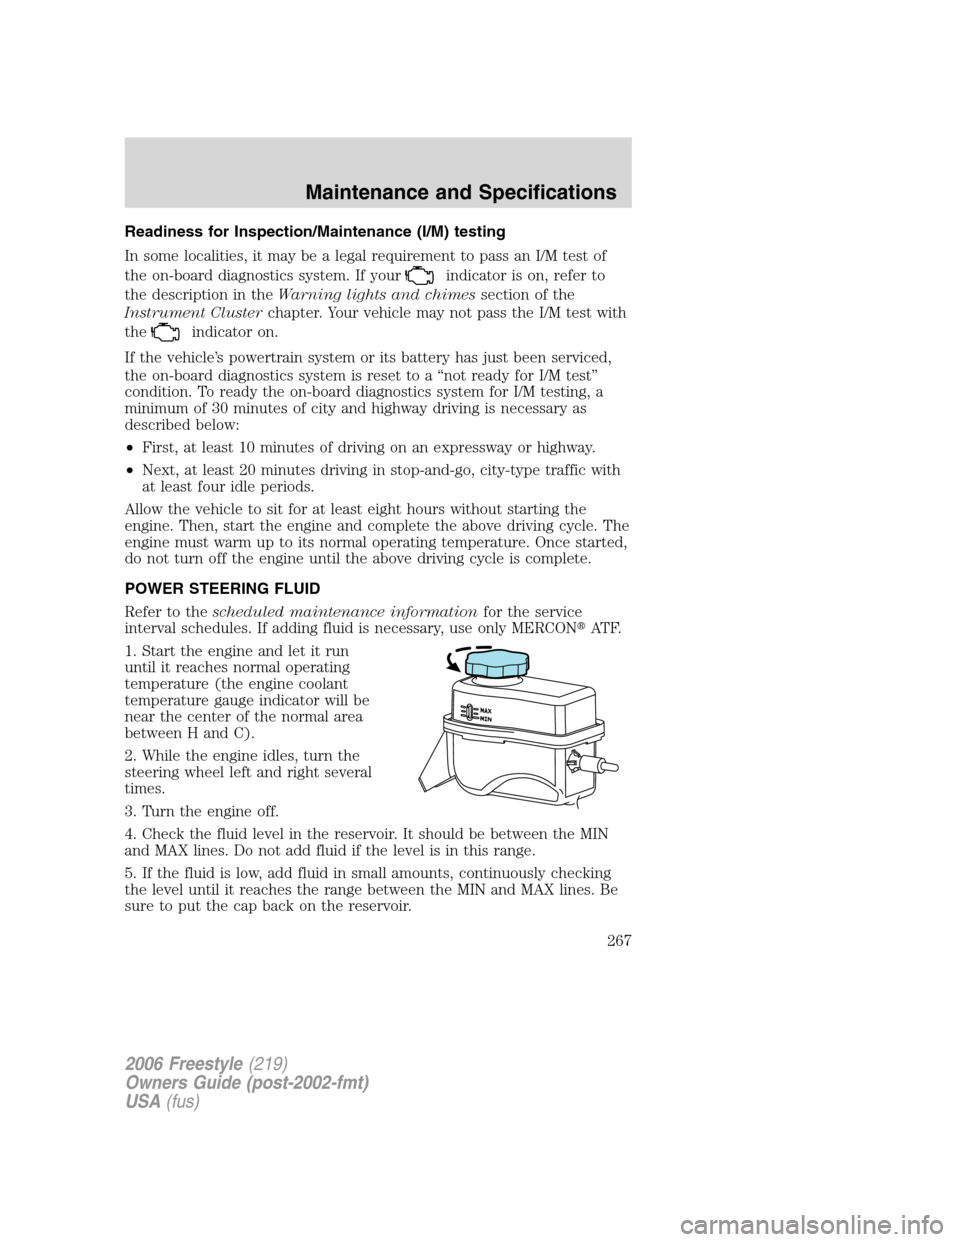 FORD FREESTYLE 2006 1.G Owners Manual Readiness for Inspection/Maintenance (I/M) testing
In some localities, it may be a legal requirement to pass an I/M test of
the on-board diagnostics system. If your
indicator is on, refer to
the descr